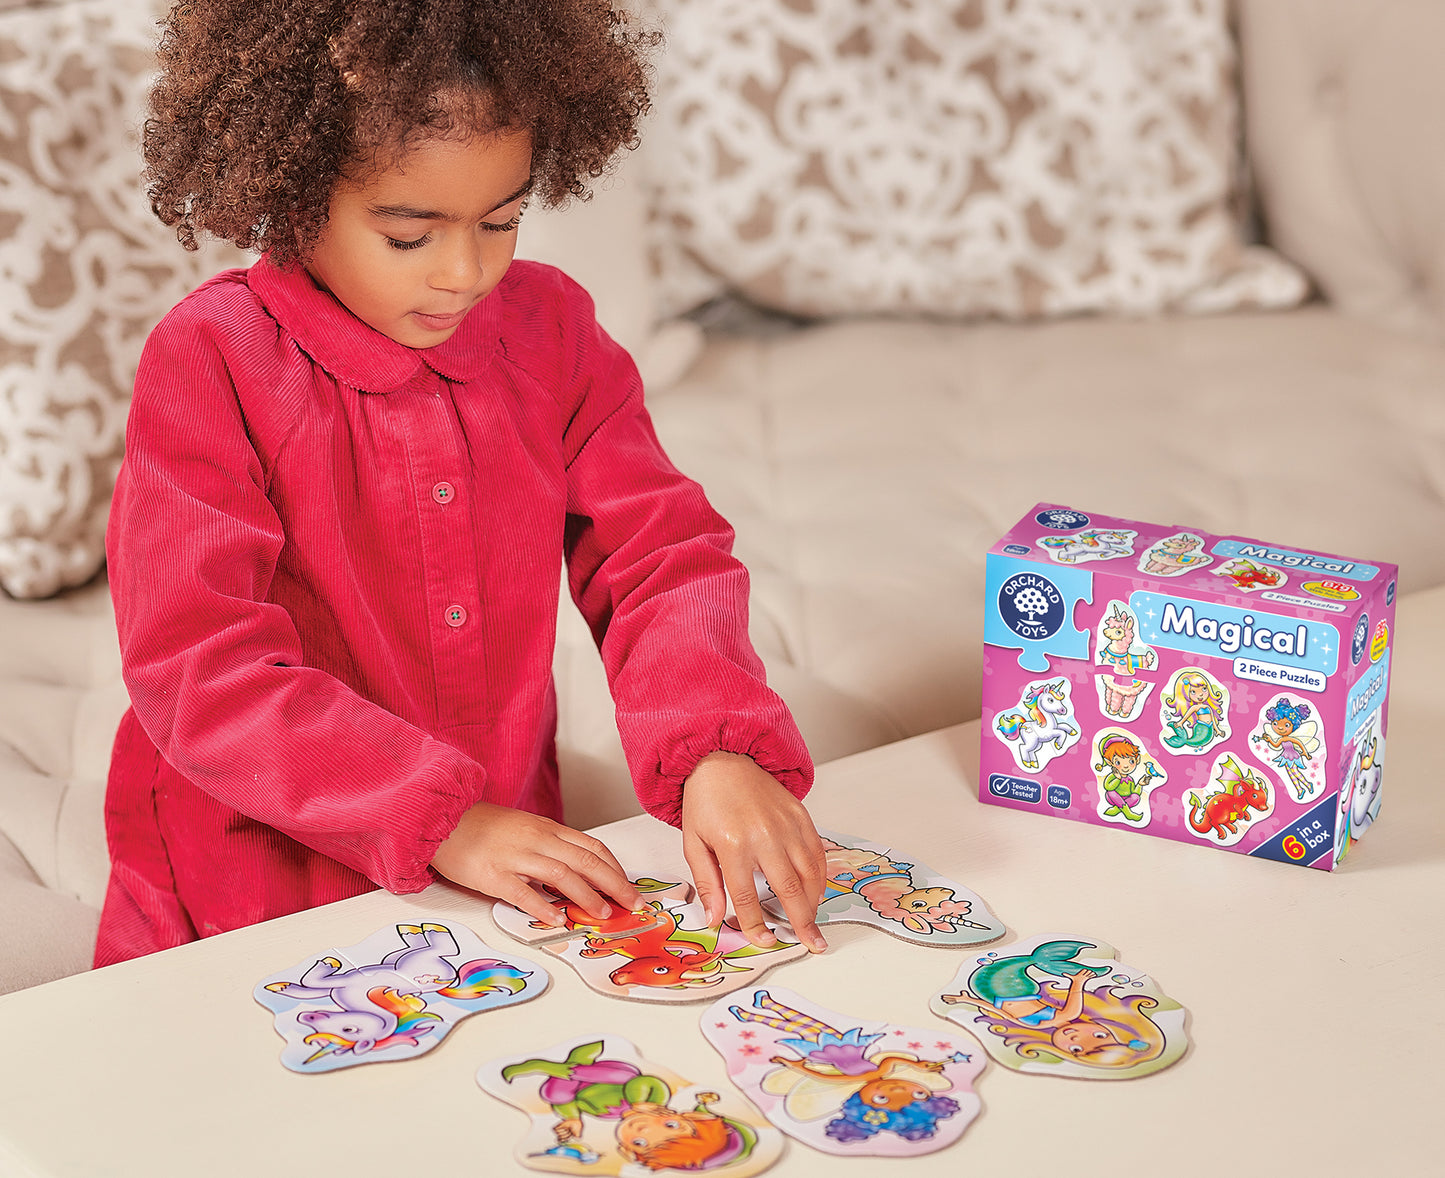 Orchard Toys Magical Jigsaw Puzzle